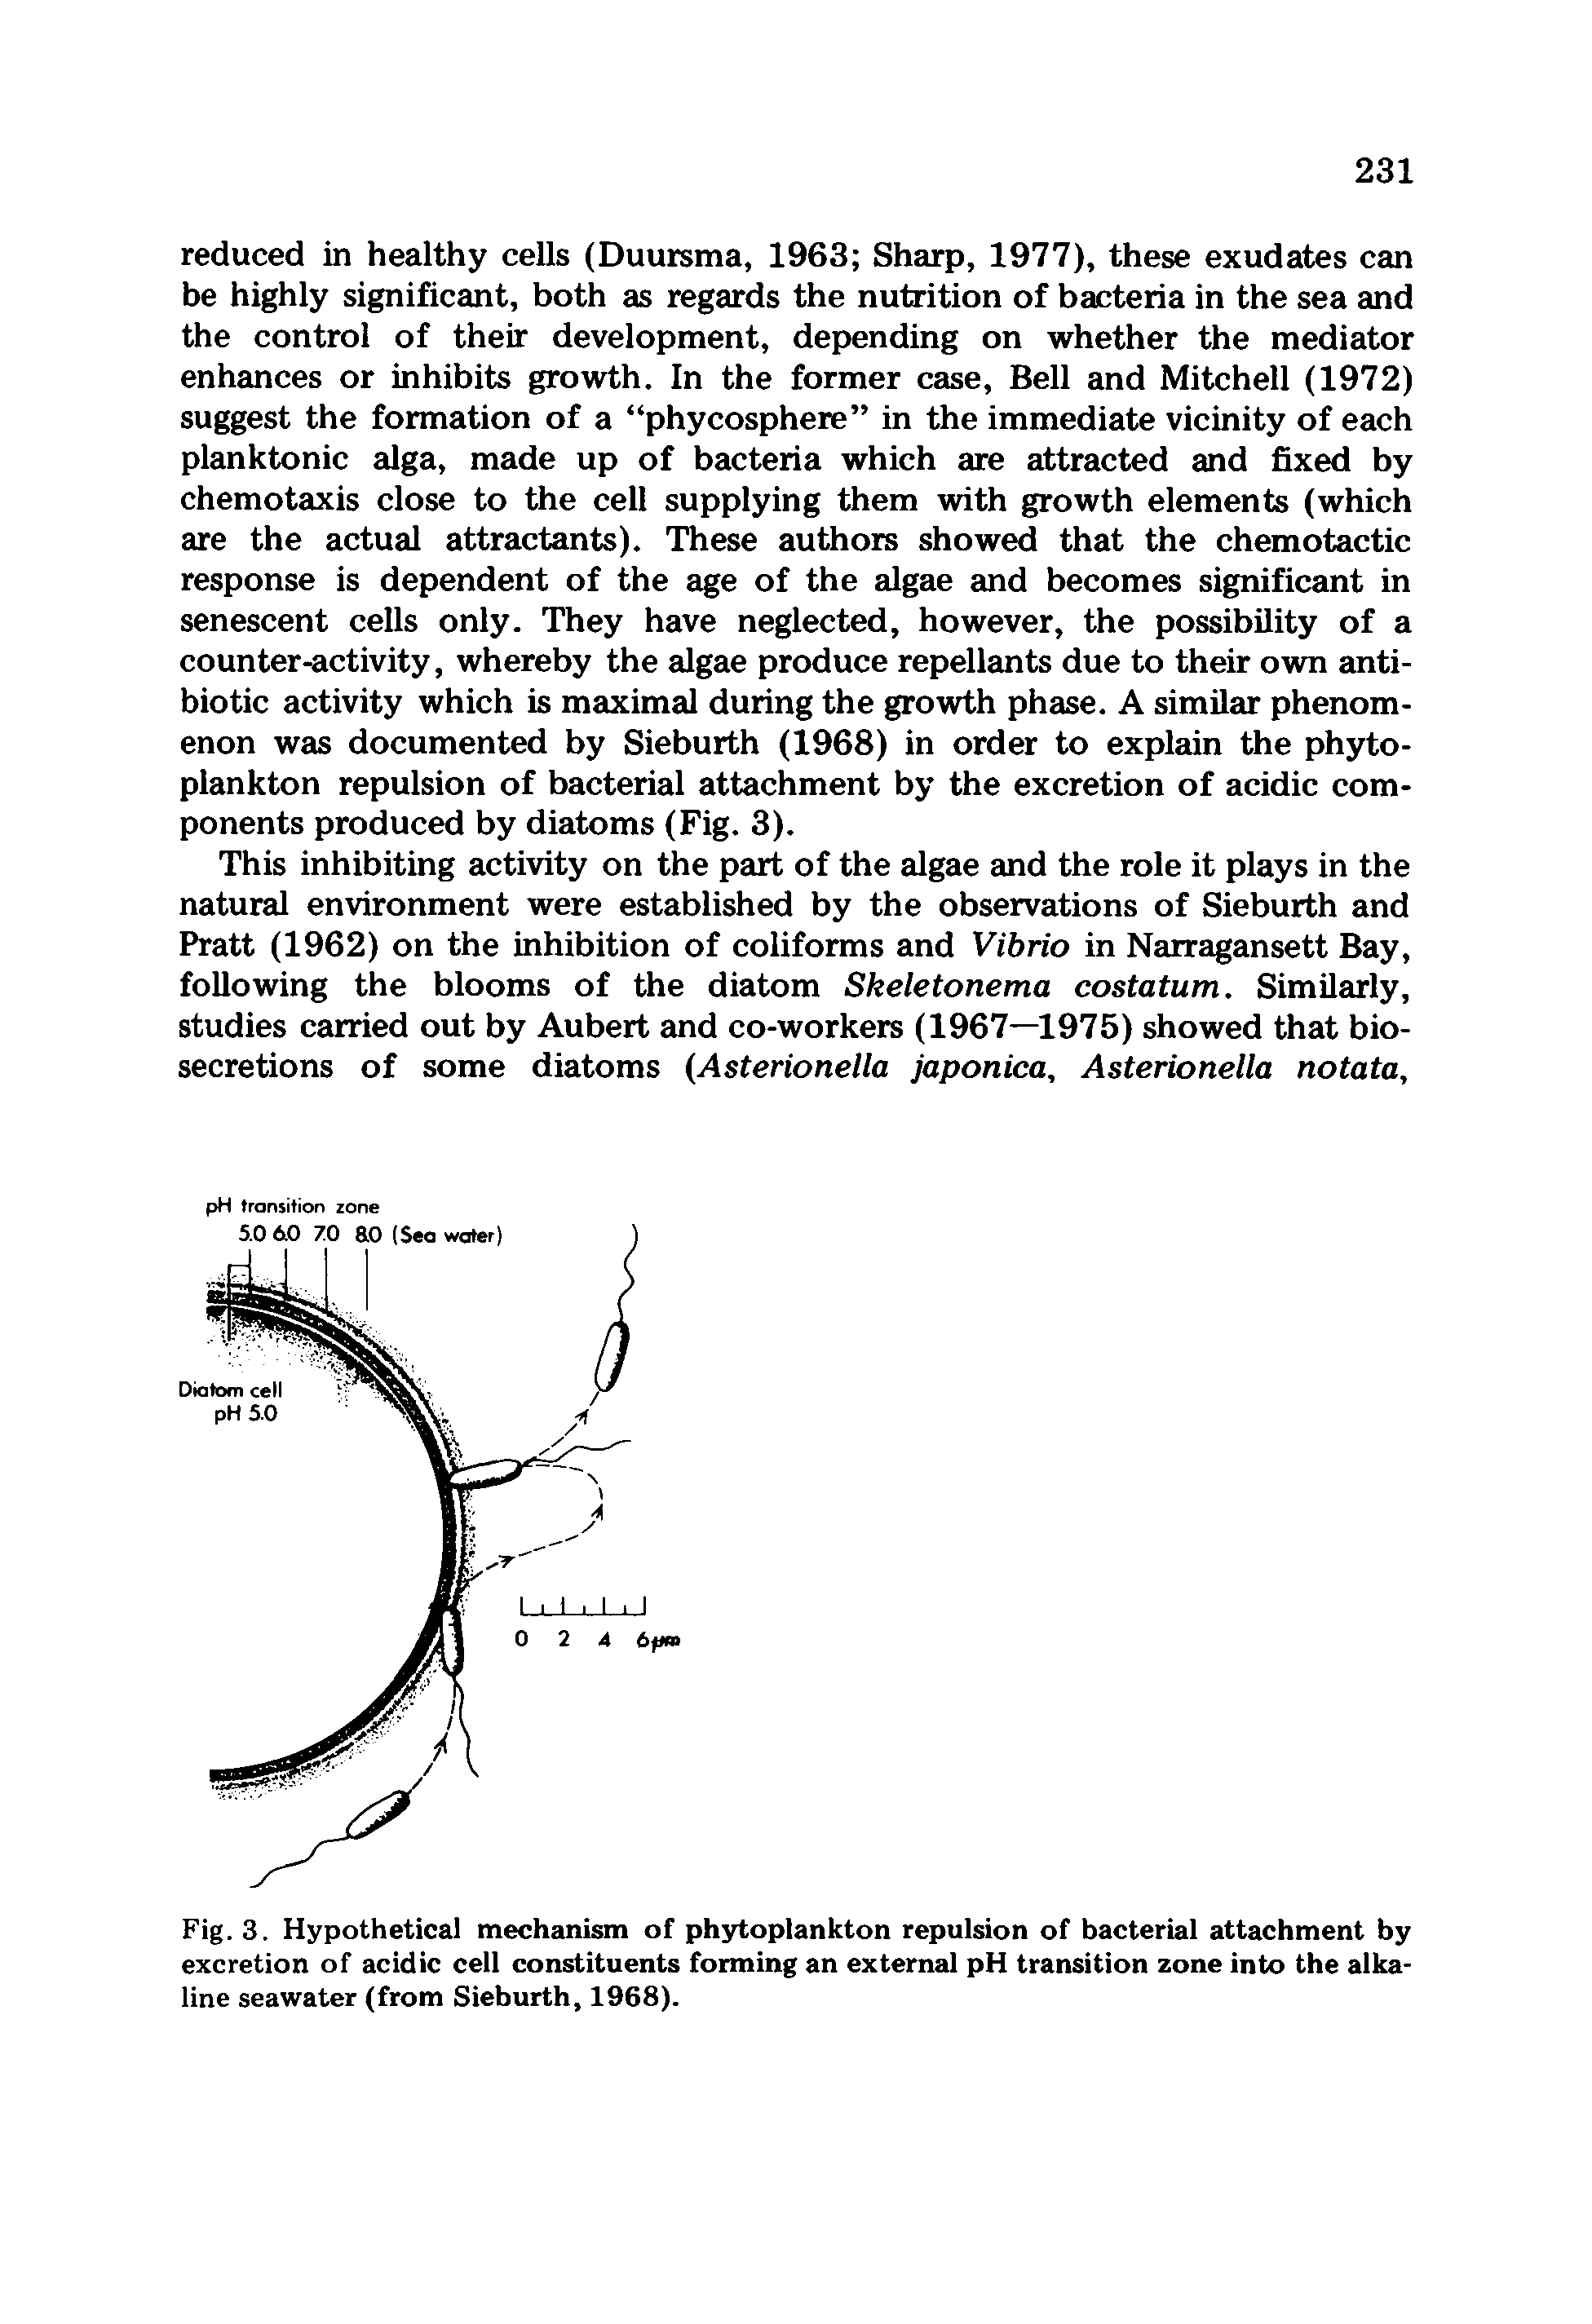 Fig. 3. Hypothetical mechanism of phytoplankton repulsion of bacterial attachment by excretion of acidic cell constituents forming an external pH transition zone into the alkaline seawater (from Sieburth, 1968).